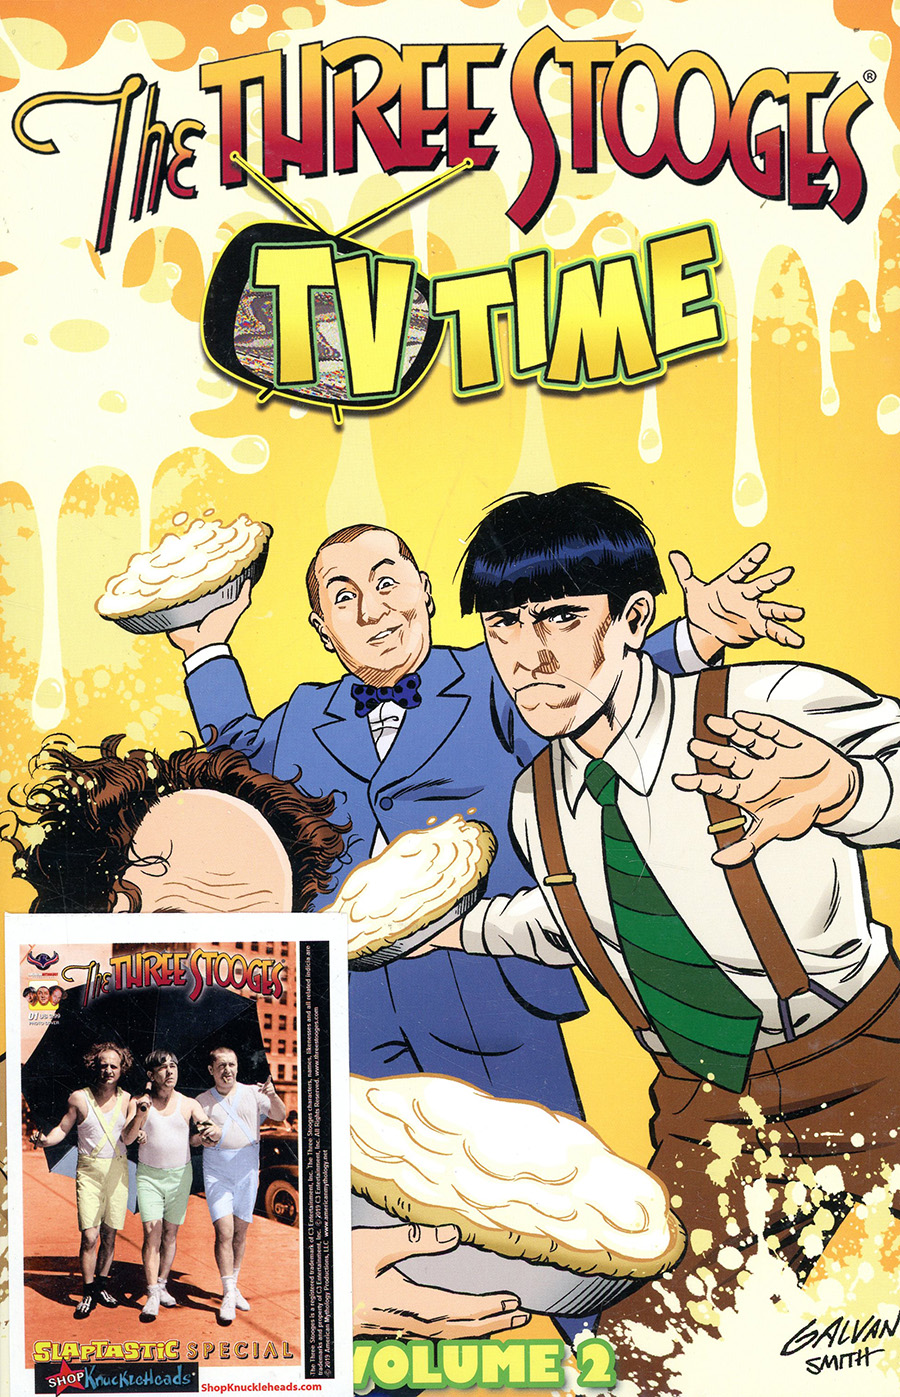 Three Stooges Vol 2 TV Time TP With Promo Card